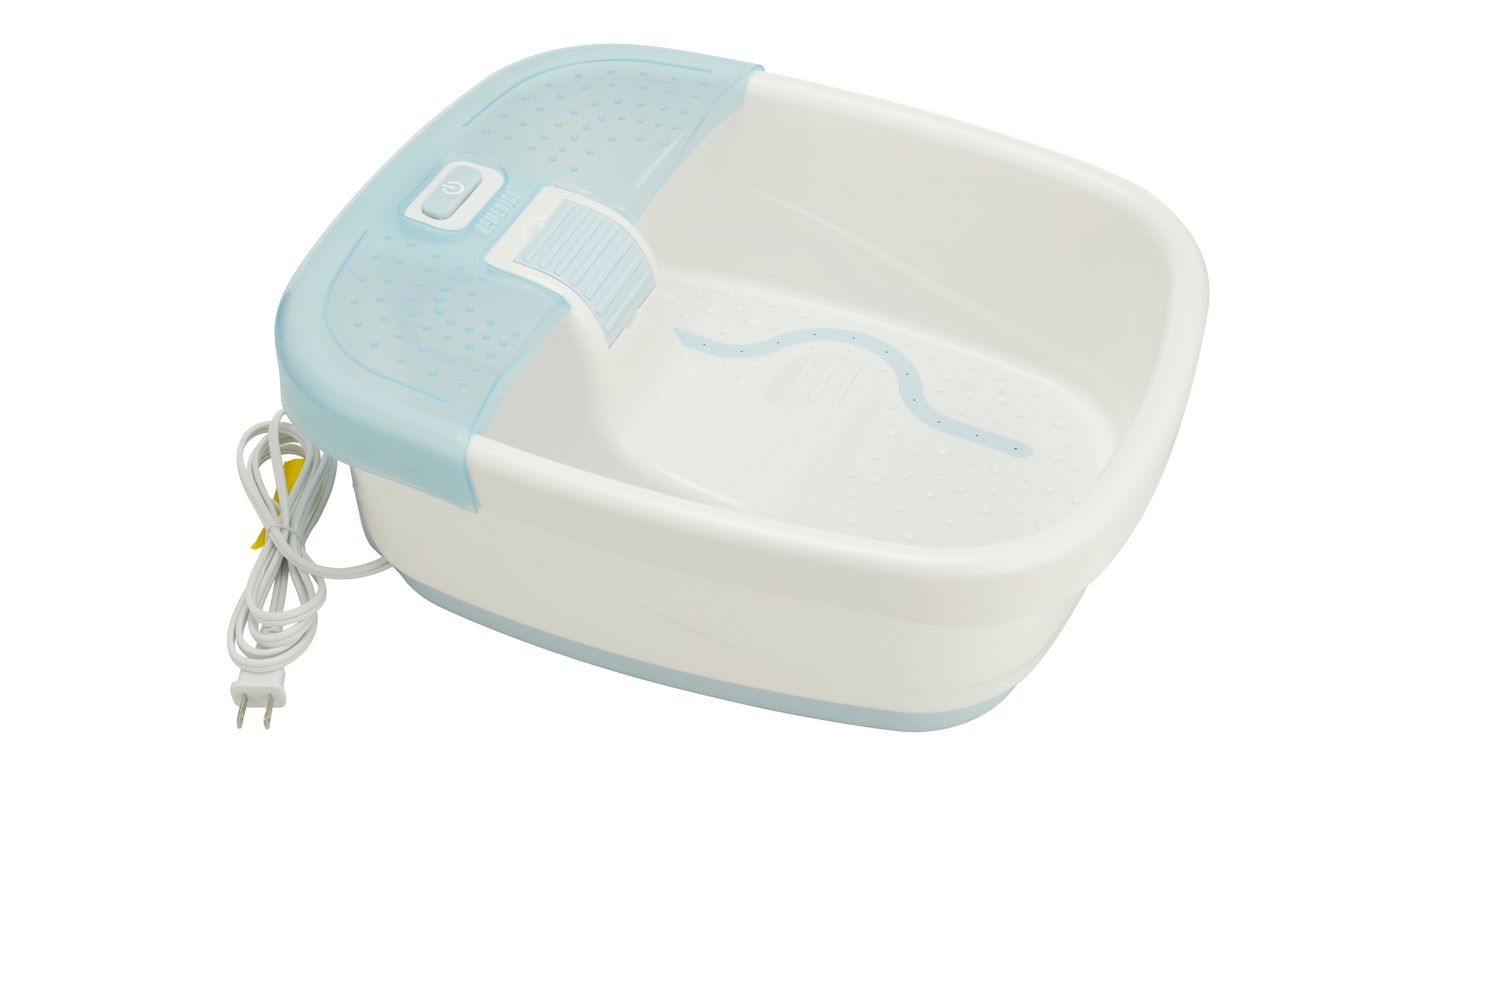 Bubble Bliss Deluxe Foot Spa with Heat (Blue) 